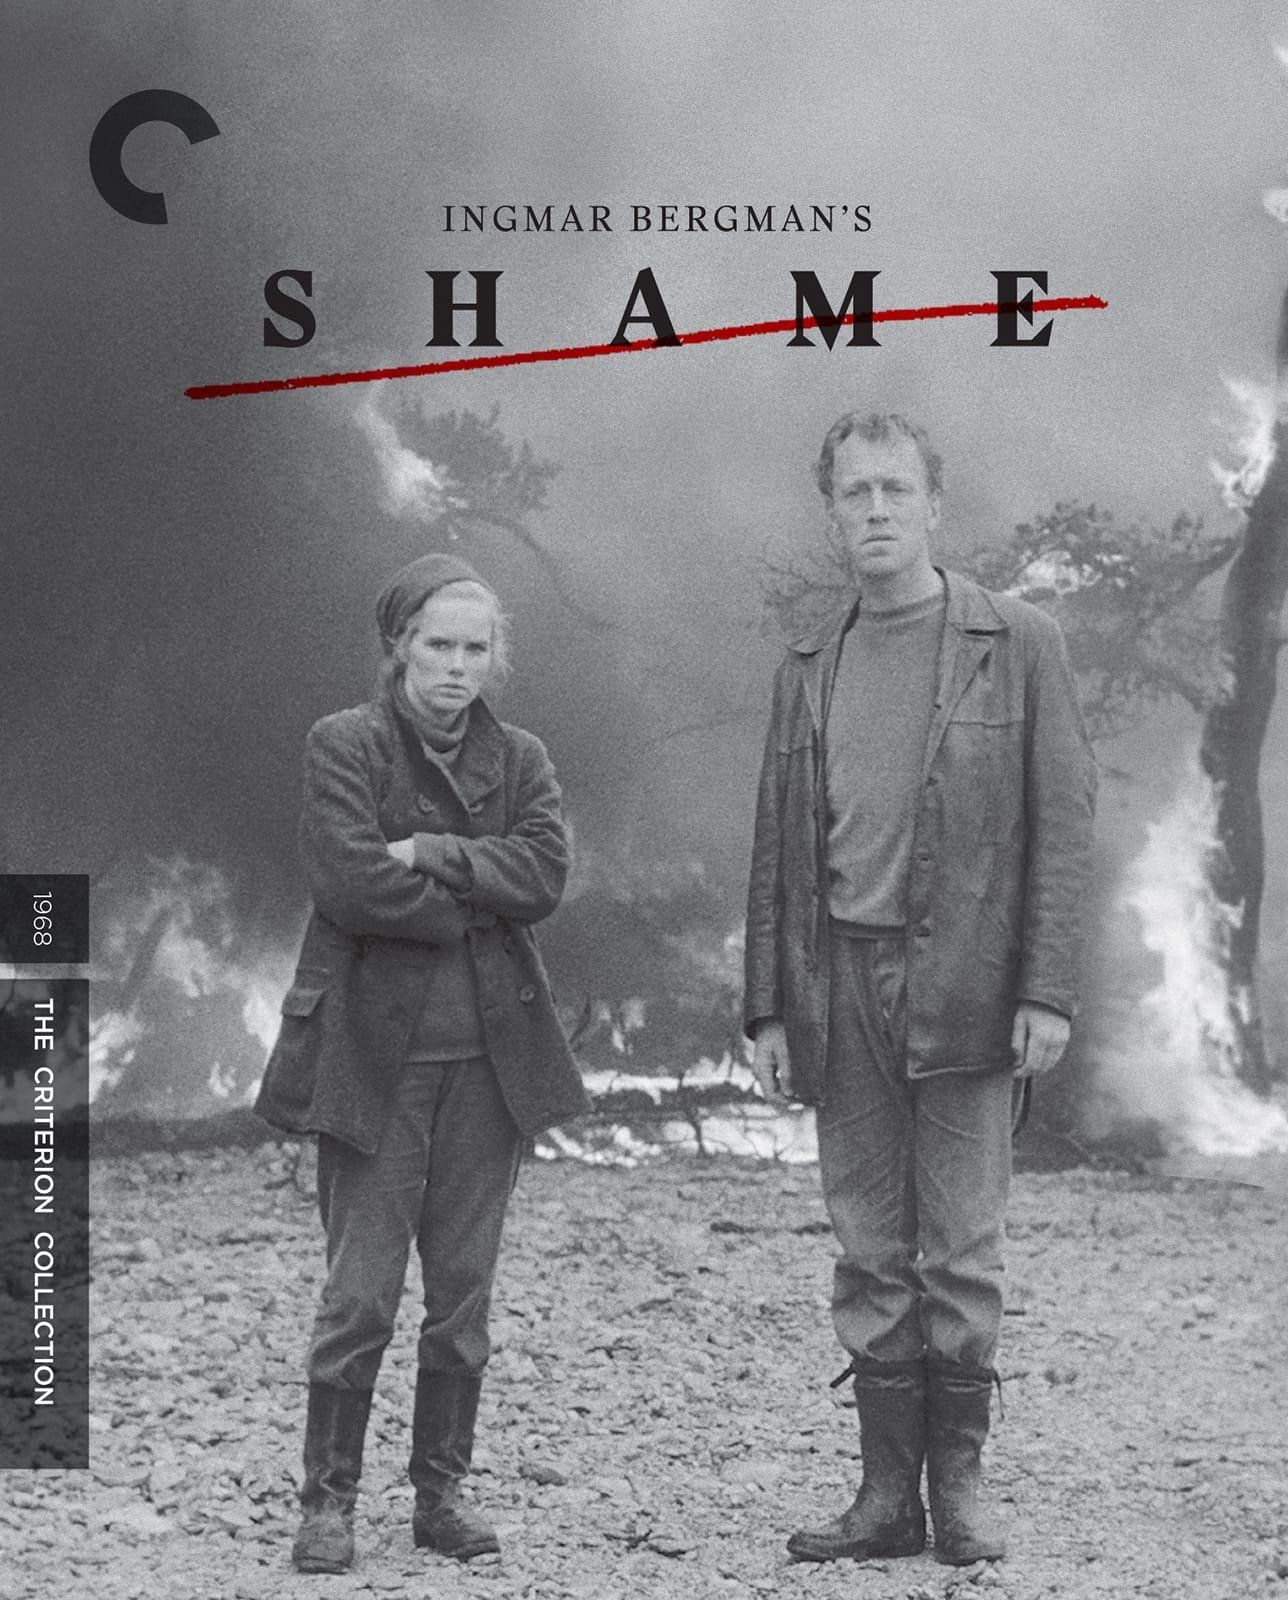 Blu Ray Review: Ingmar Bergman's Shame On The Criterion Collection